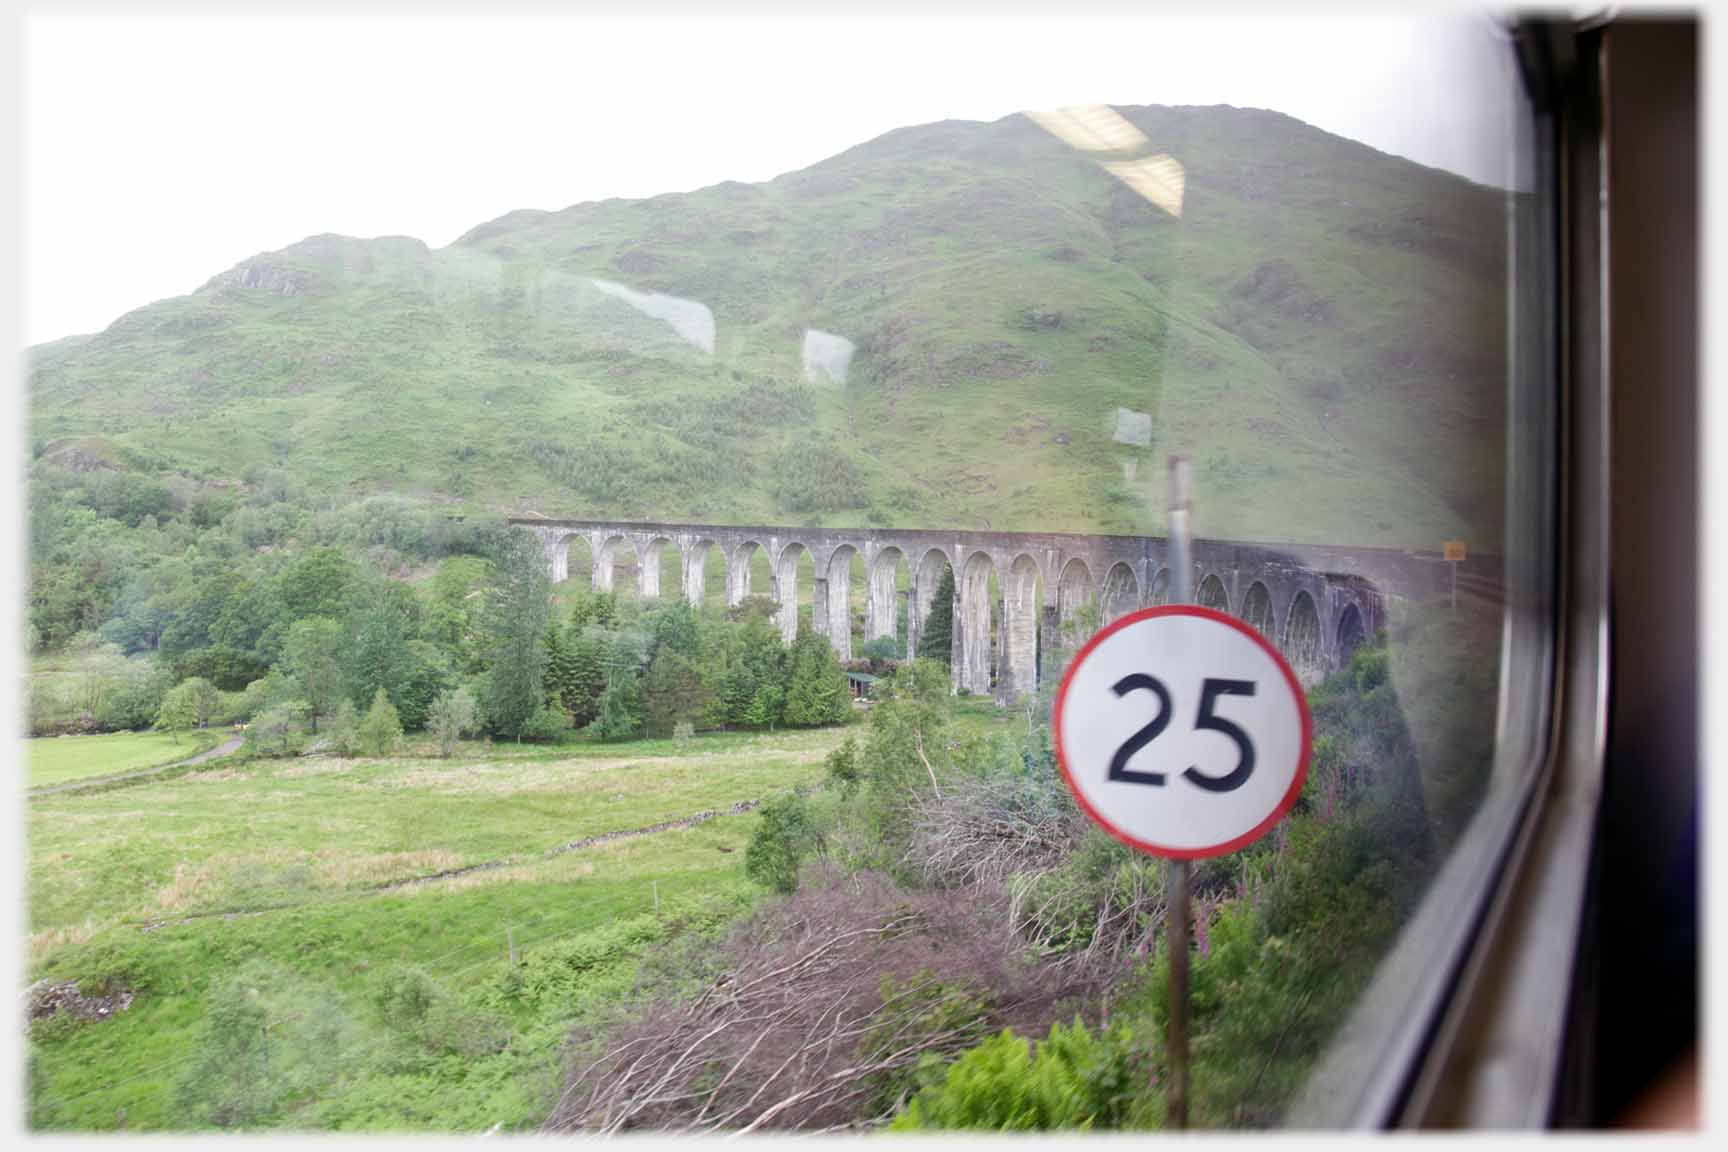 Viaduct seen from train carriage window, wiwth 25 mph speed restriction.